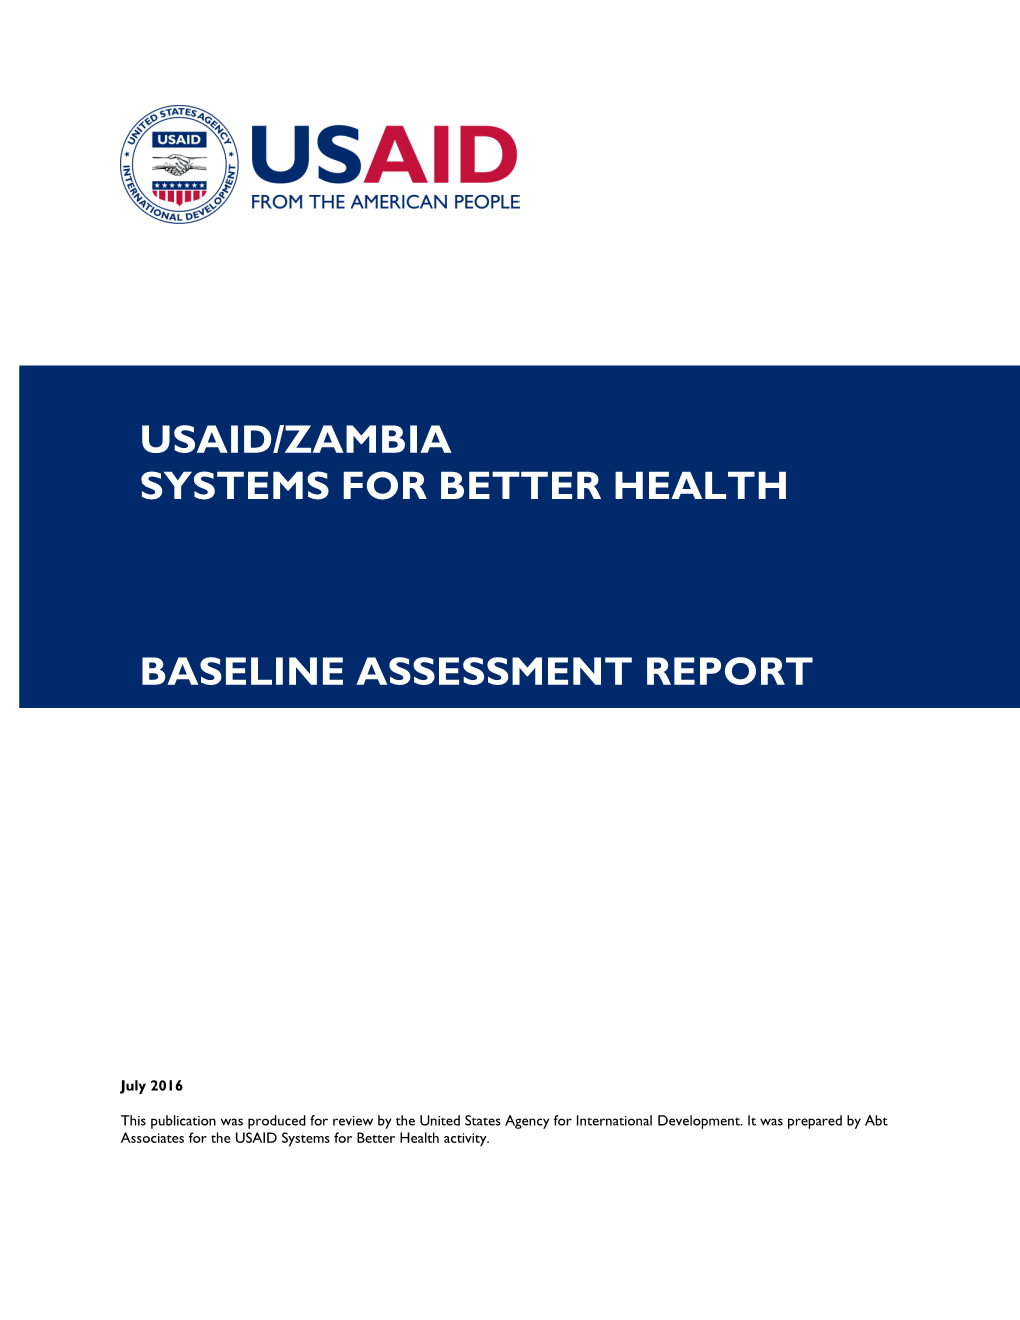 Usaid/Zambia Systems for Better Health Baseline